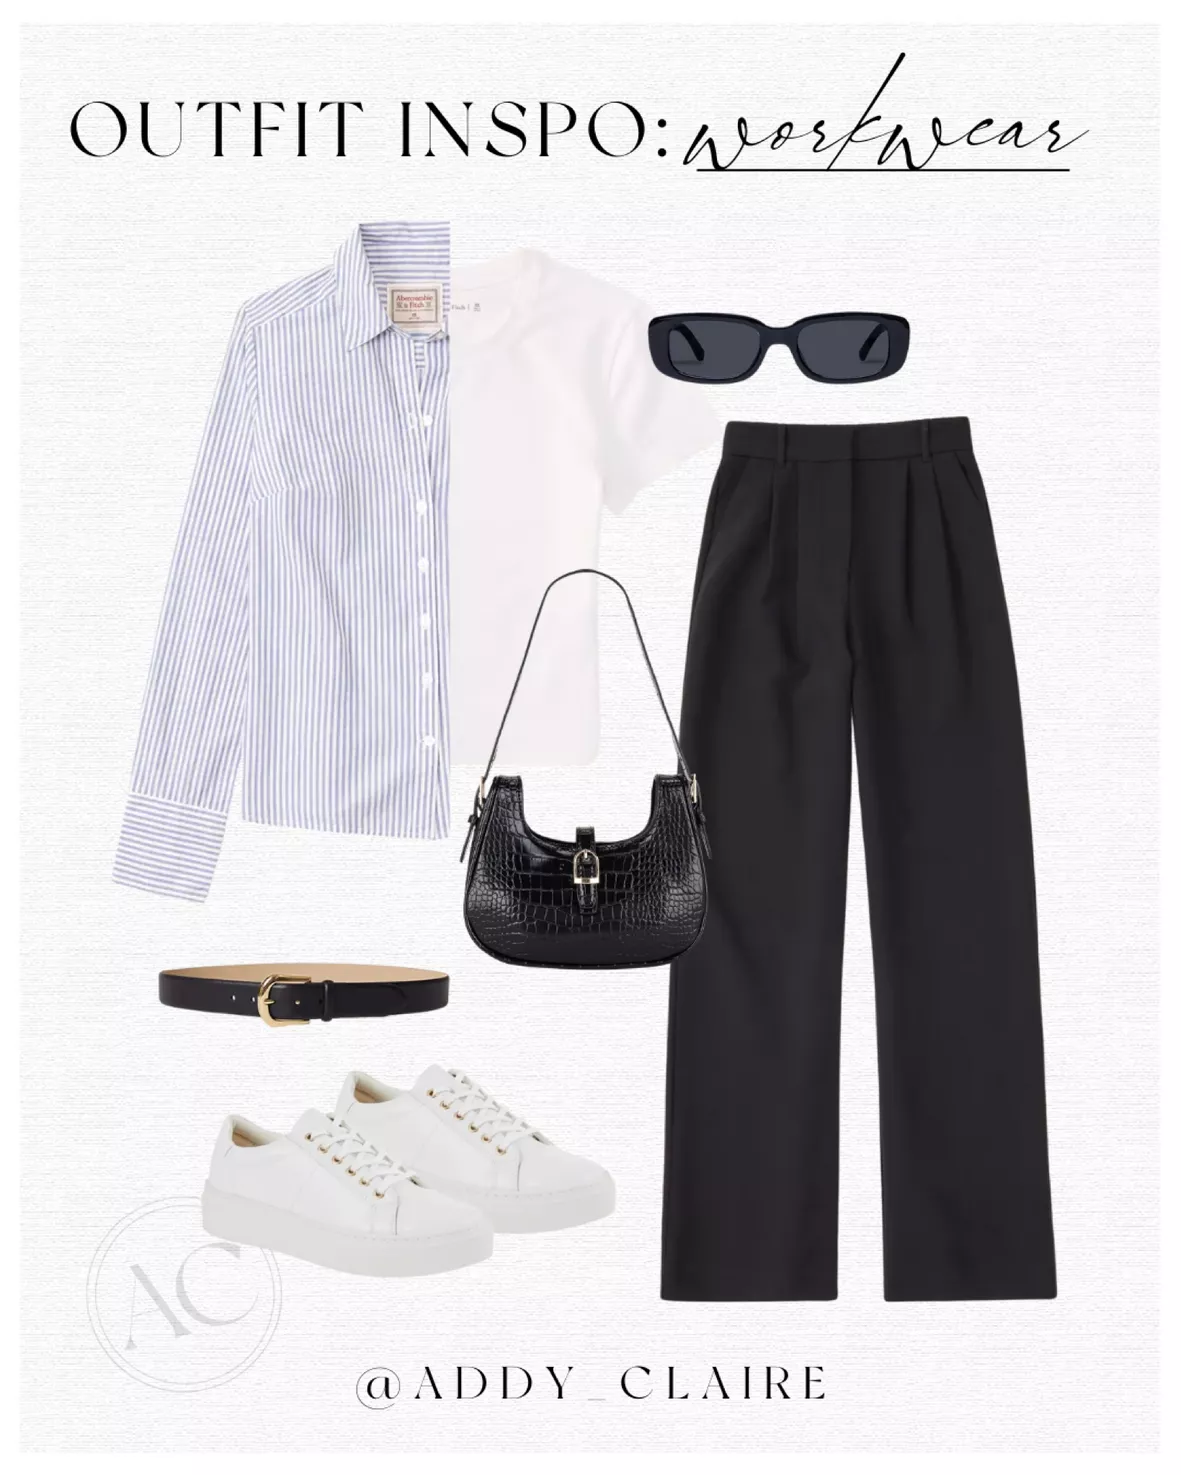 1 MONTH of Work Outfit Ideas for Women who work in an office